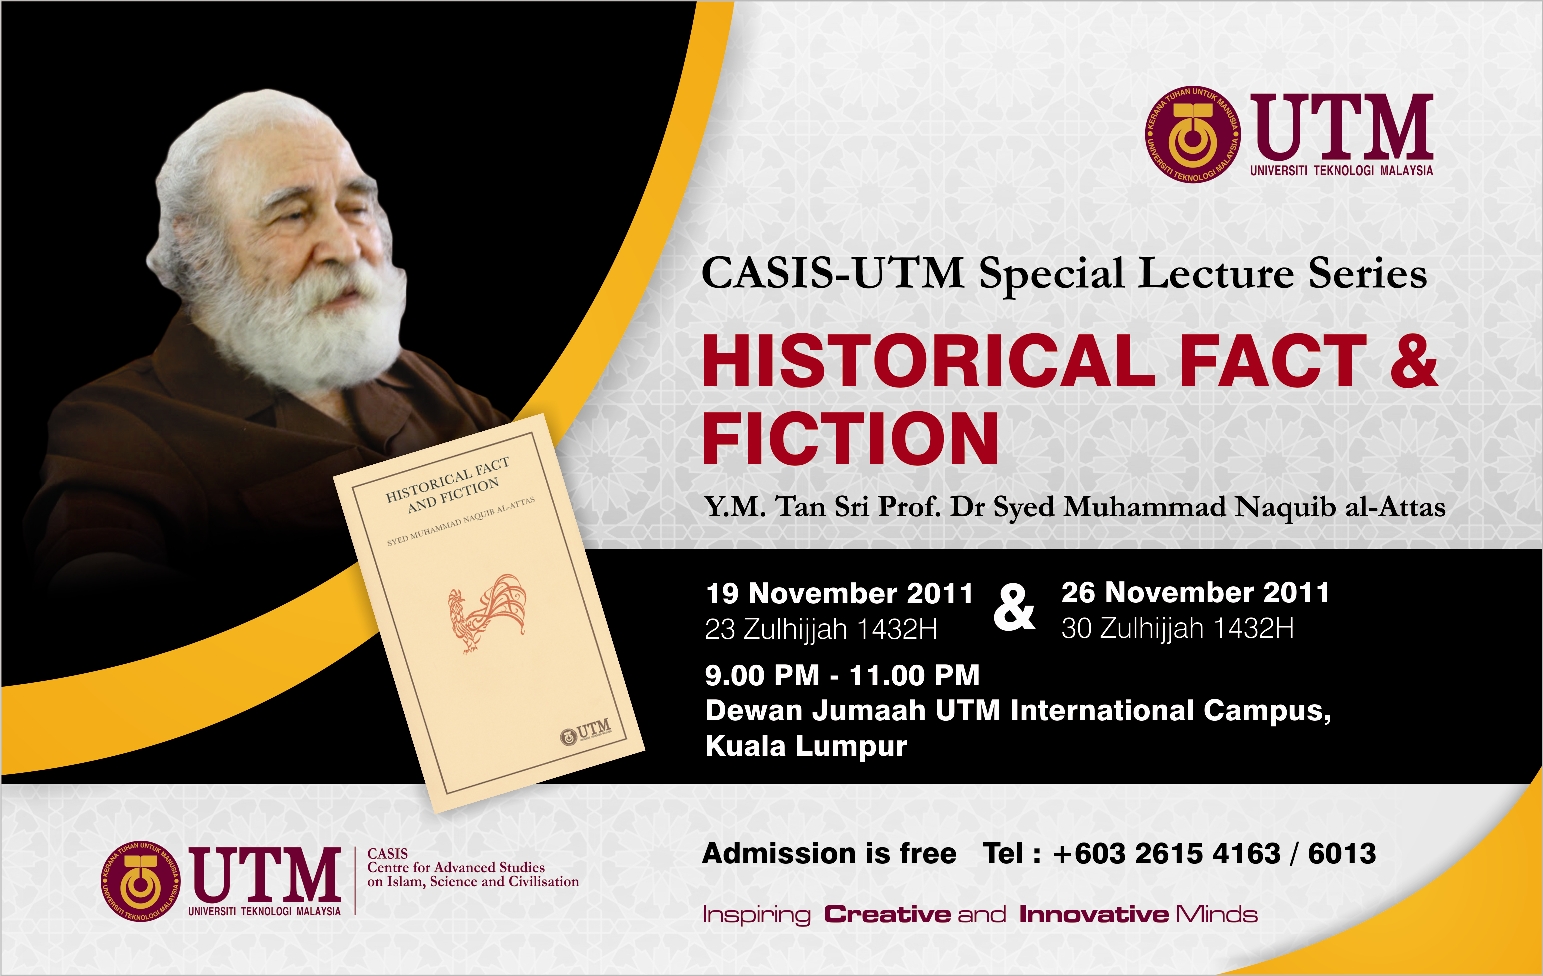 Casis-UTM Special Lecture Series History Fact & Fiction